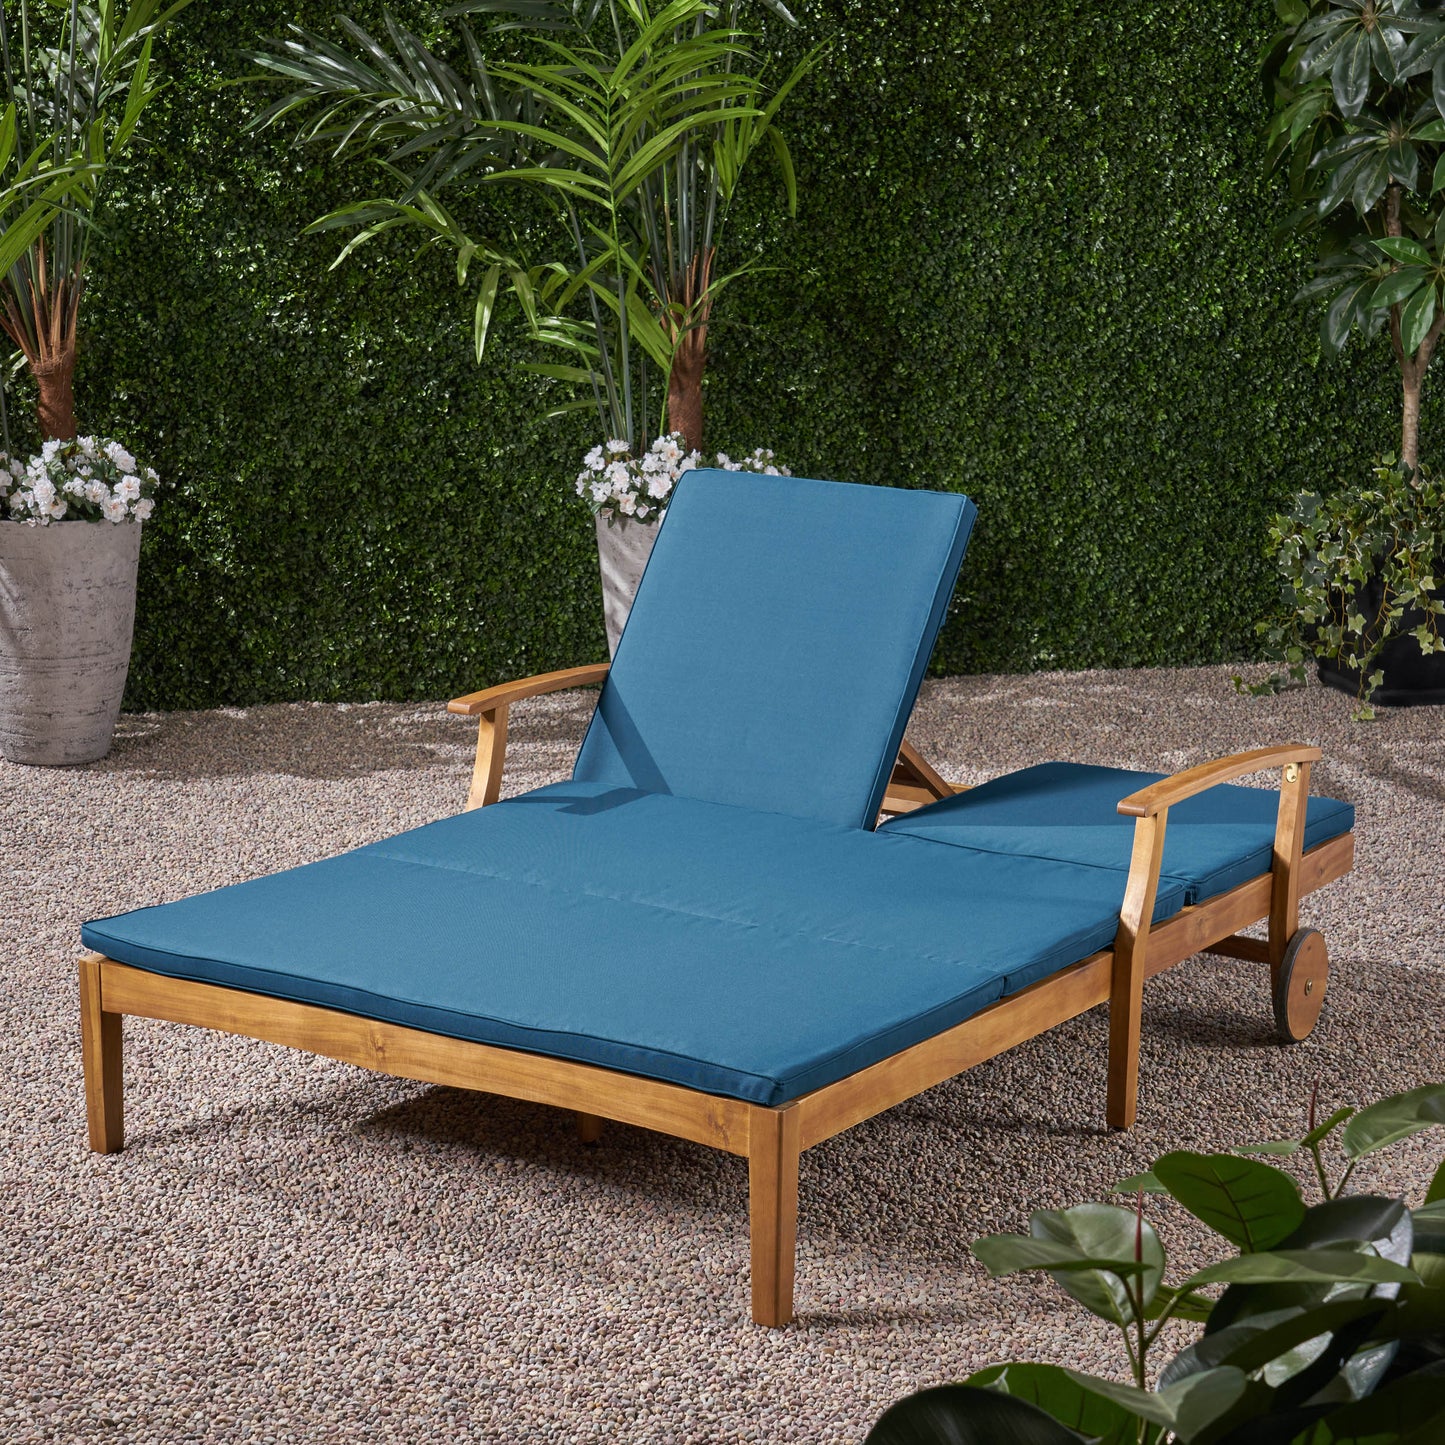 Samantha Double Chaise Lounge for Yard and Patio, Acacia Wood Frame